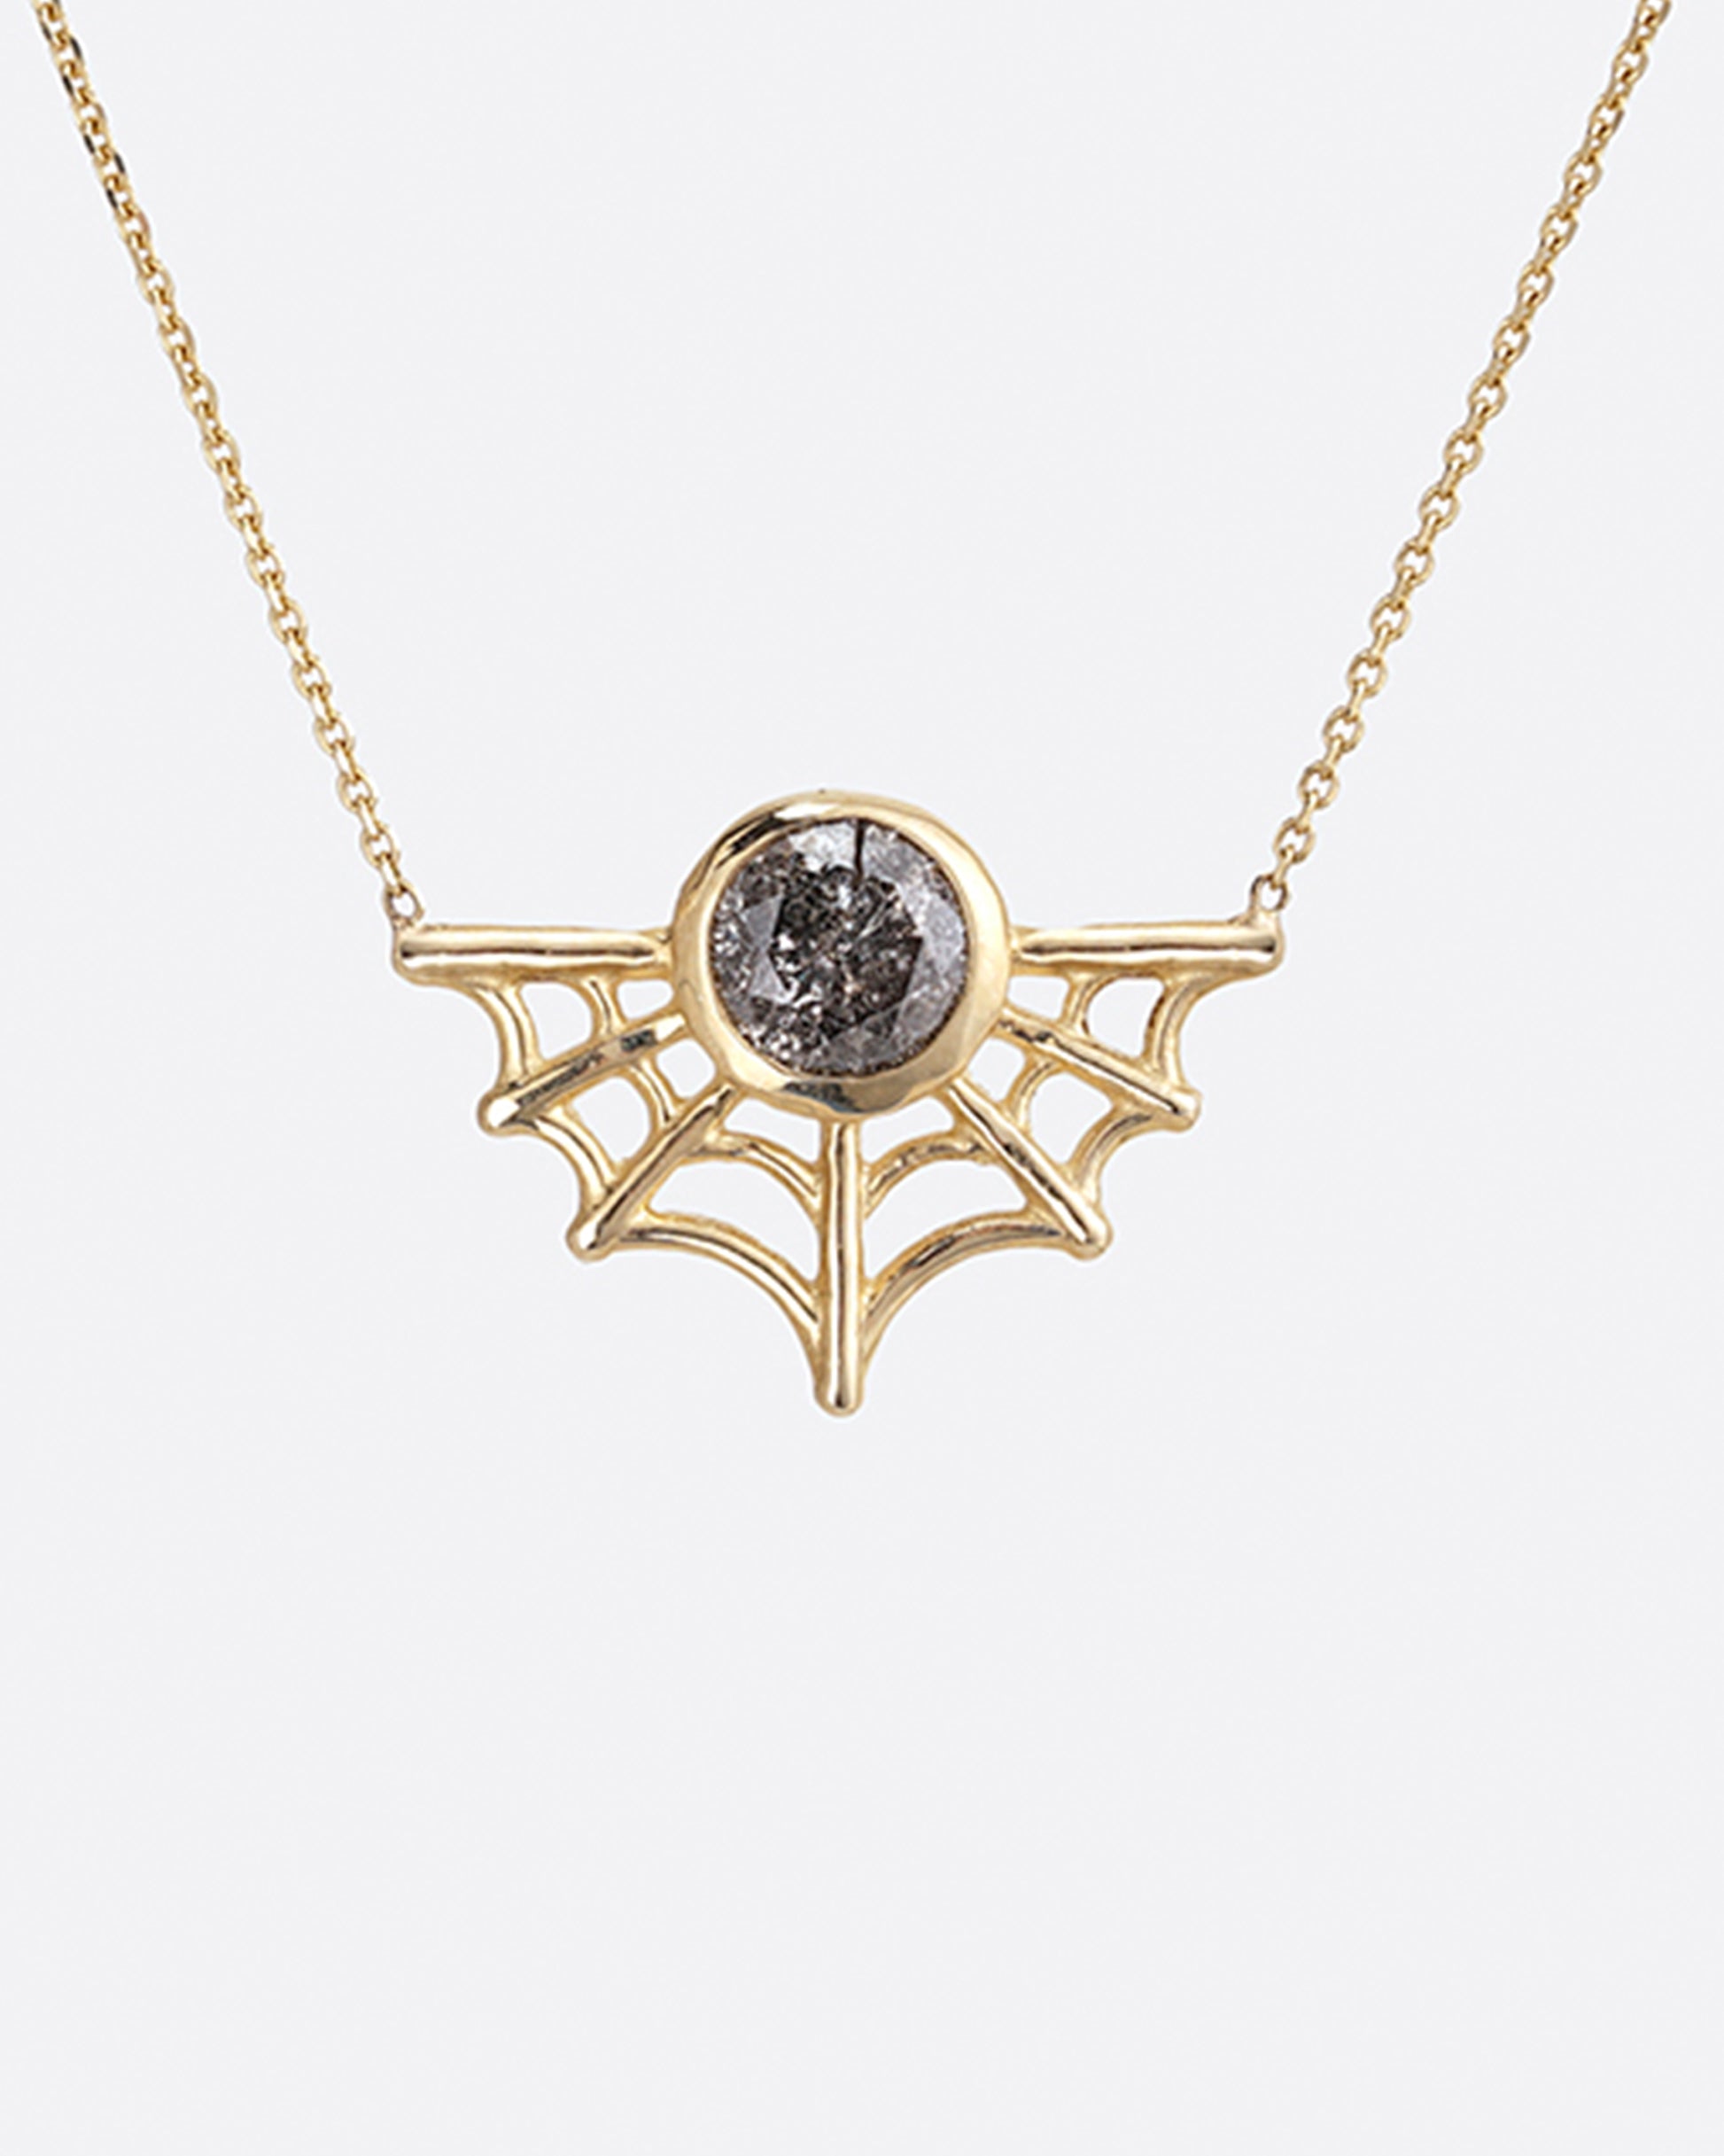 A curved spider web necklace with a bezel set salt and pepper diamond nestled in the middle.